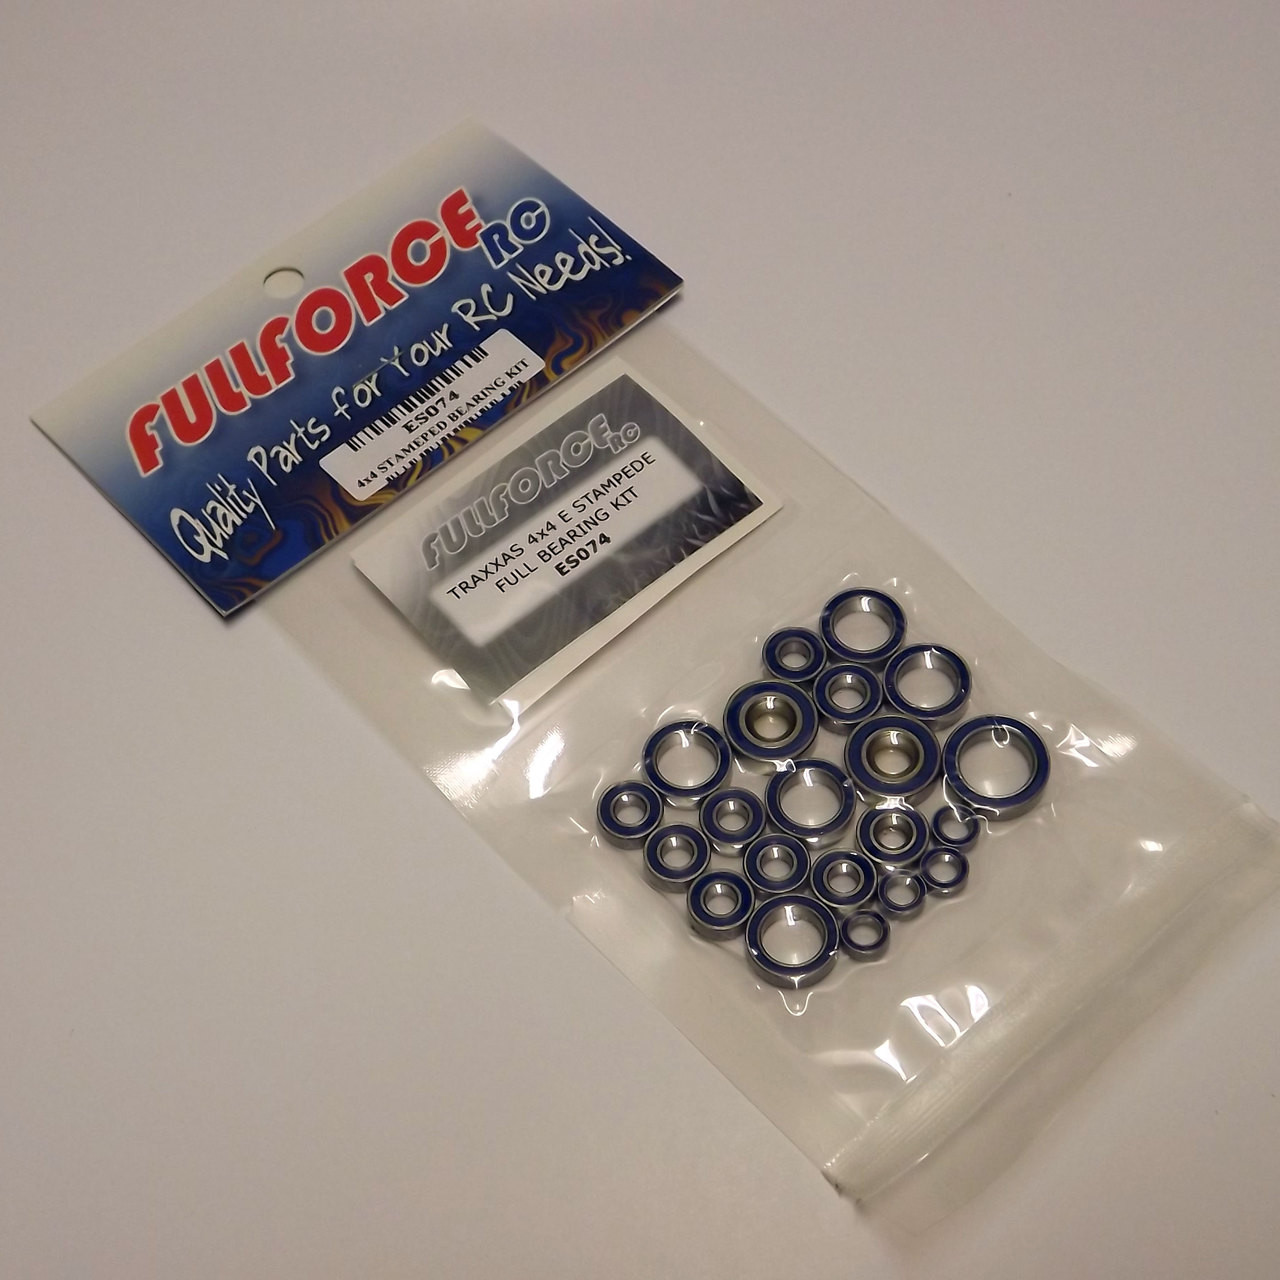 FOR Traxxas 4x4 Electric Stampede bearing kit packaged and ready to ship!